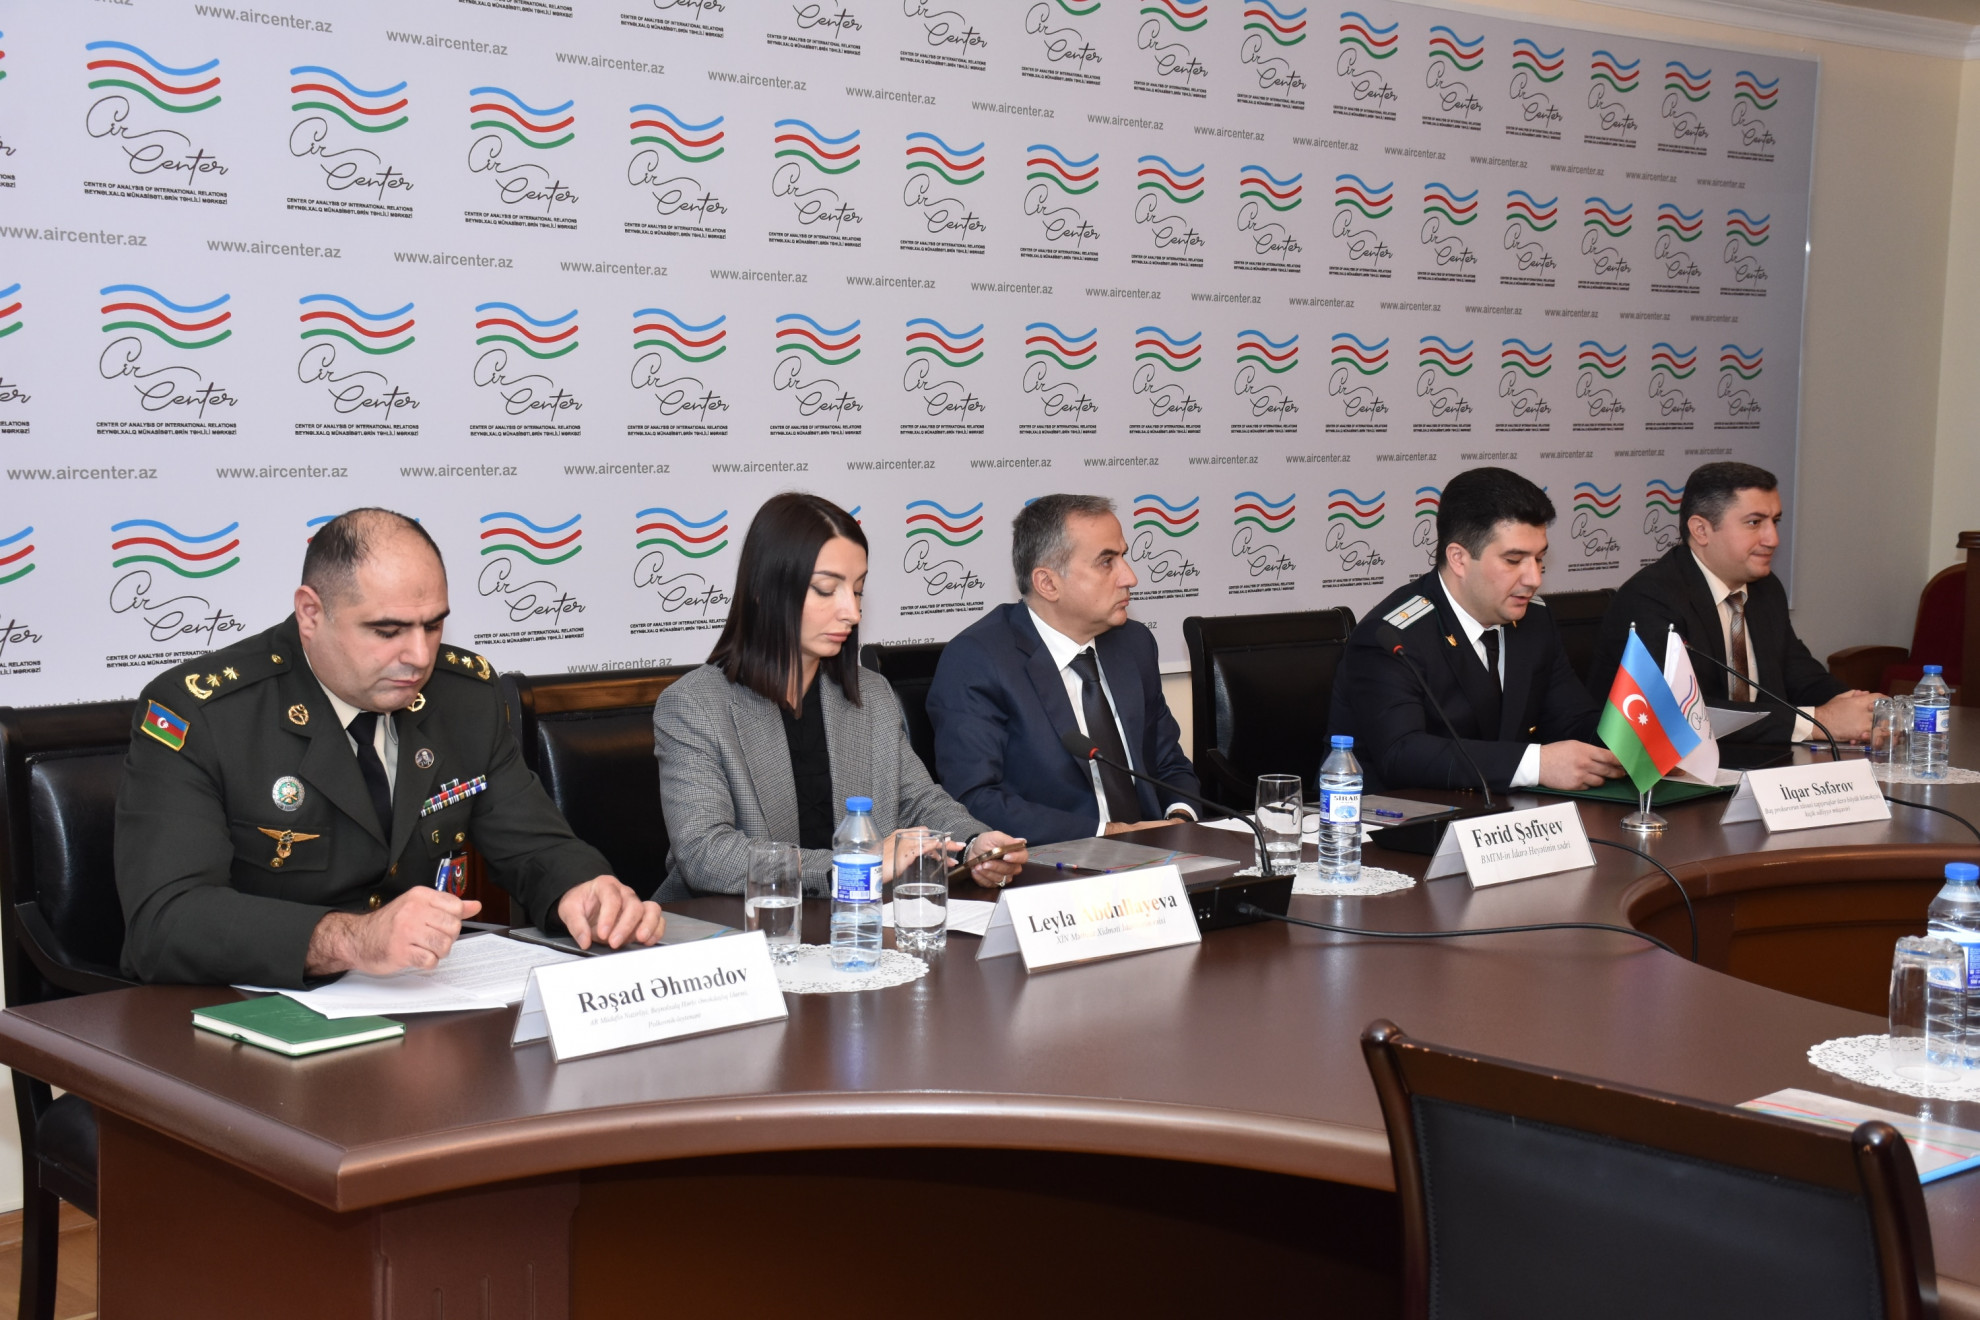  Round Table discussions dedicated to the second year since the missile attack on Ganja city were held at the AIR Center